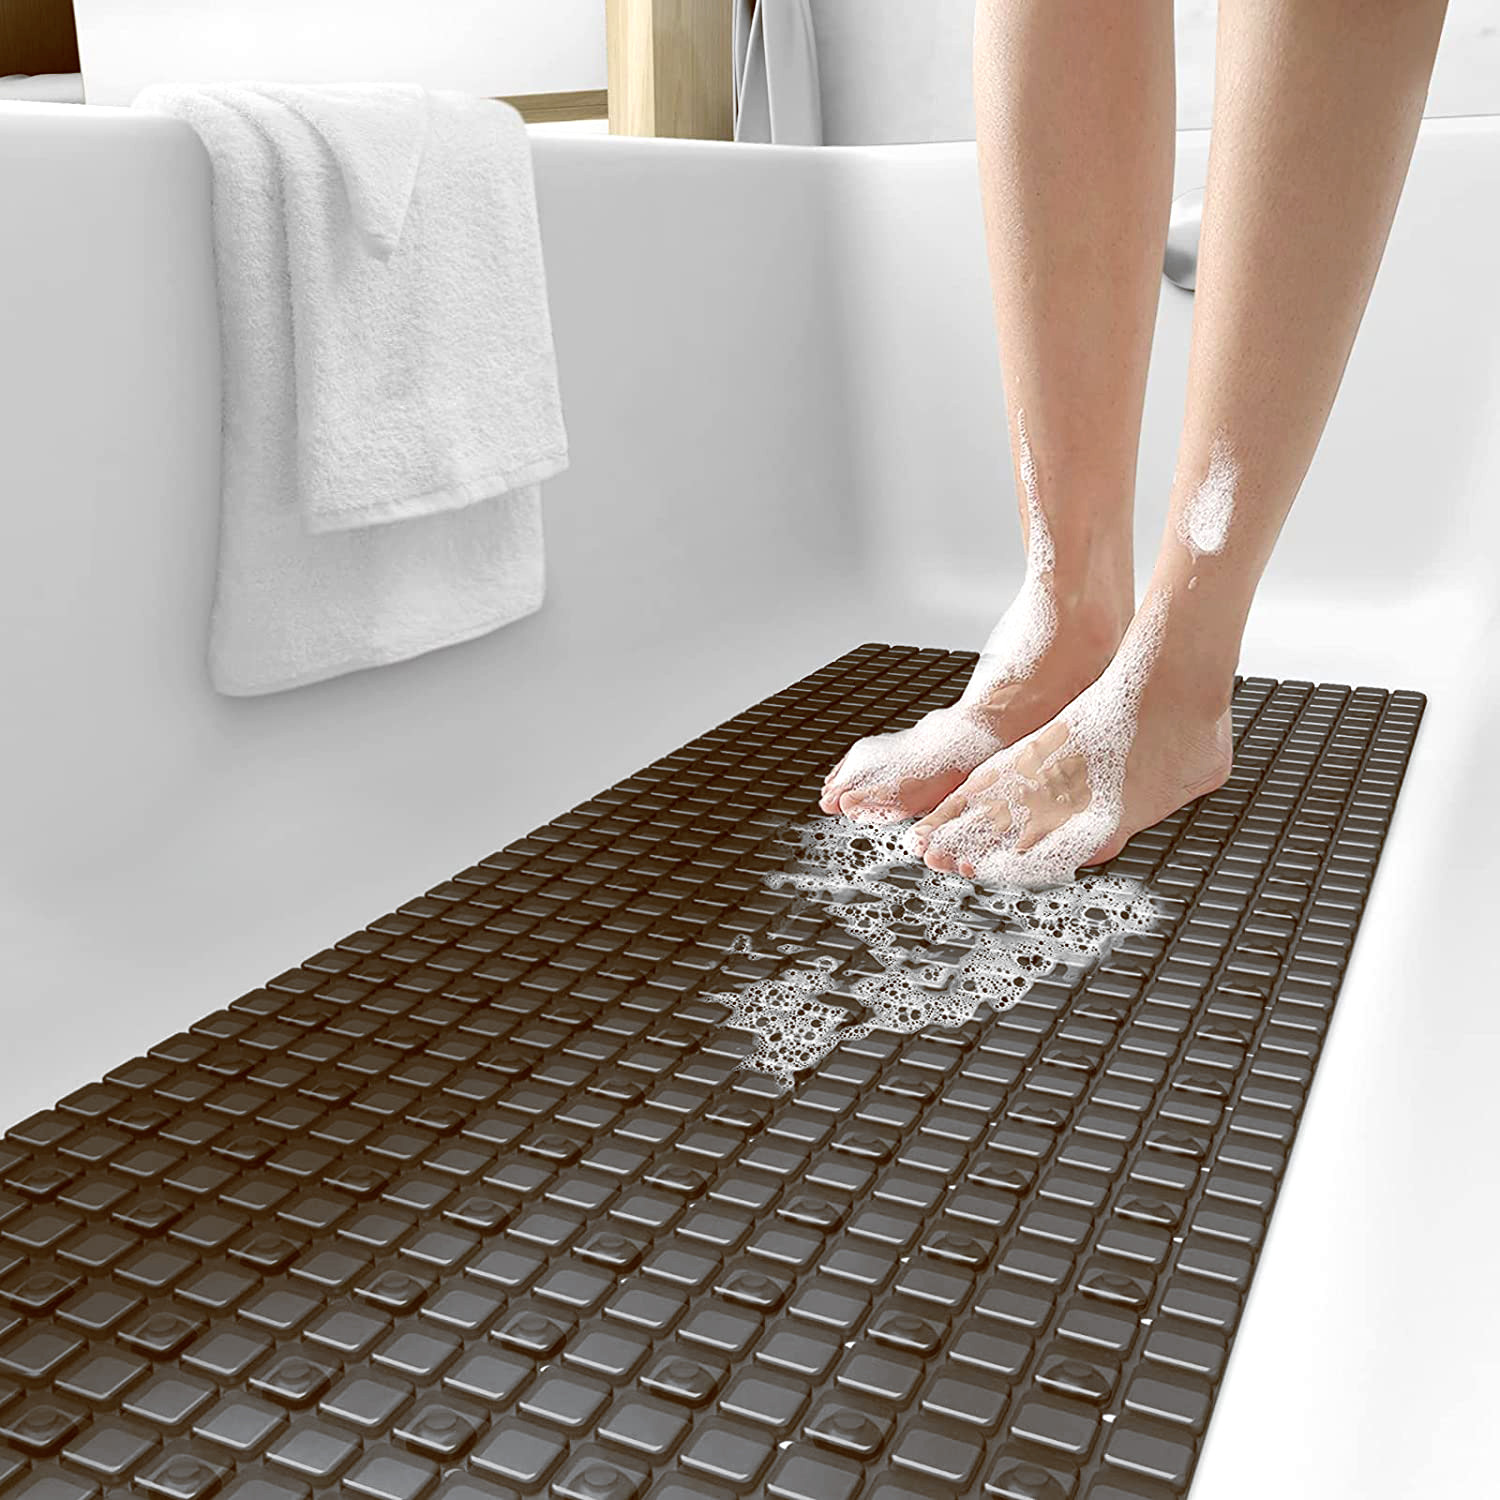 Kuber Industries Non Slip Eco Friendly Shower Bath Mat With Drain Holes And Suction Cups to Keep Floor Clean (Brown) -HS43KUBMART25553